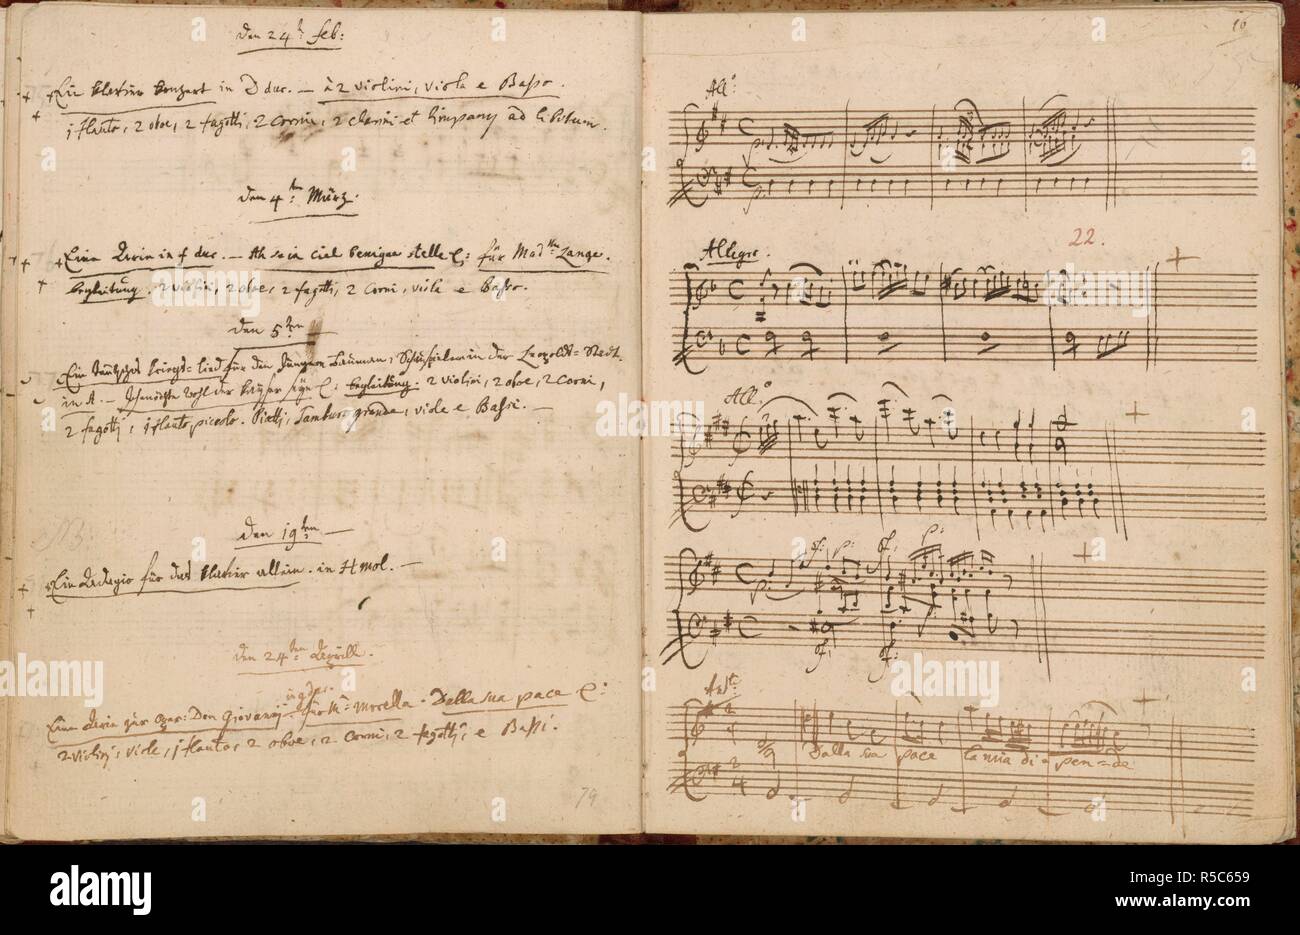 Mozart S Thematic Catalogue Verzeichna Ss Aller Meiner Werke 1784 1791 Whole Opening Pages For 24 February To 24 April 1788 From Mozart S Autograph Thematic Catalogue Of His Works With Dates And Description On The Your current browser isn't compatible with soundcloud. https www alamy com mozarts thematic catalogue verzeichnss aller meiner werke 1784 1791 whole opening pages for 24 february to 24 april 1788 from mozarts autograph thematic catalogue of his works with dates and description on the left hand page opposite the corresponding musical incipits piano concerto in d the coronation concerto k537 aria for soprano and orchestra k538 song ein deutsches kriegslied k539 adagio in b minor for piano k540 aria for tenor dalla sua pace from don giovanni k527 image taken from verzeichnss aller meiner werke originally publishedproduced in 17 image227076341 html